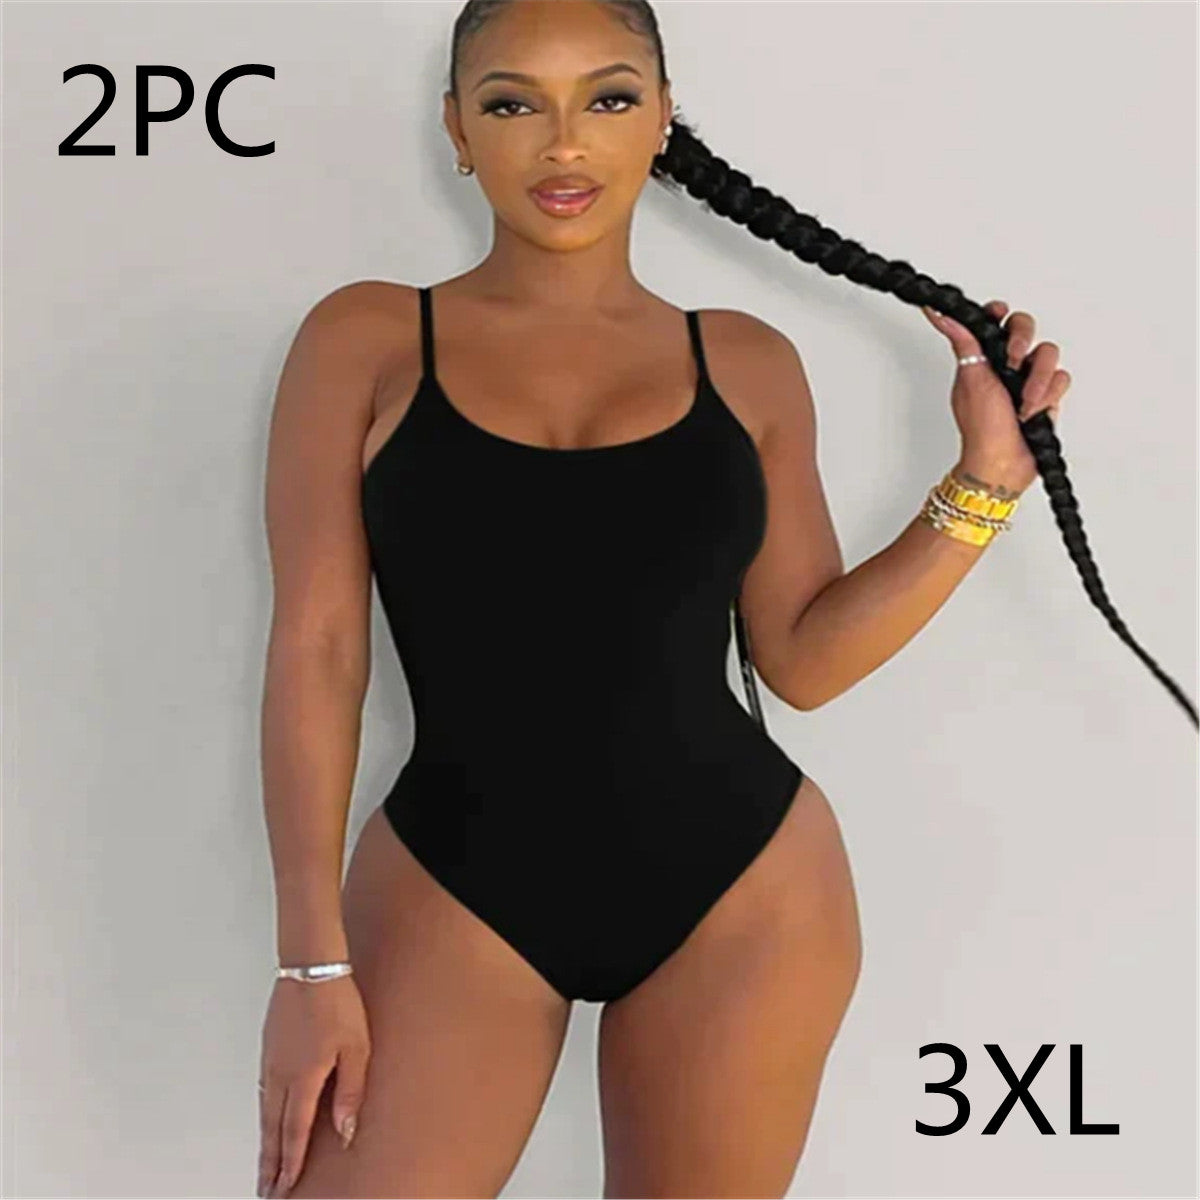 Swimsuit  | Sling Backless Plus Size Solid Color Triangle One-piece Swimsuit | Black Round Neck 2PC |  3XL| thecurvestory.myshopify.com